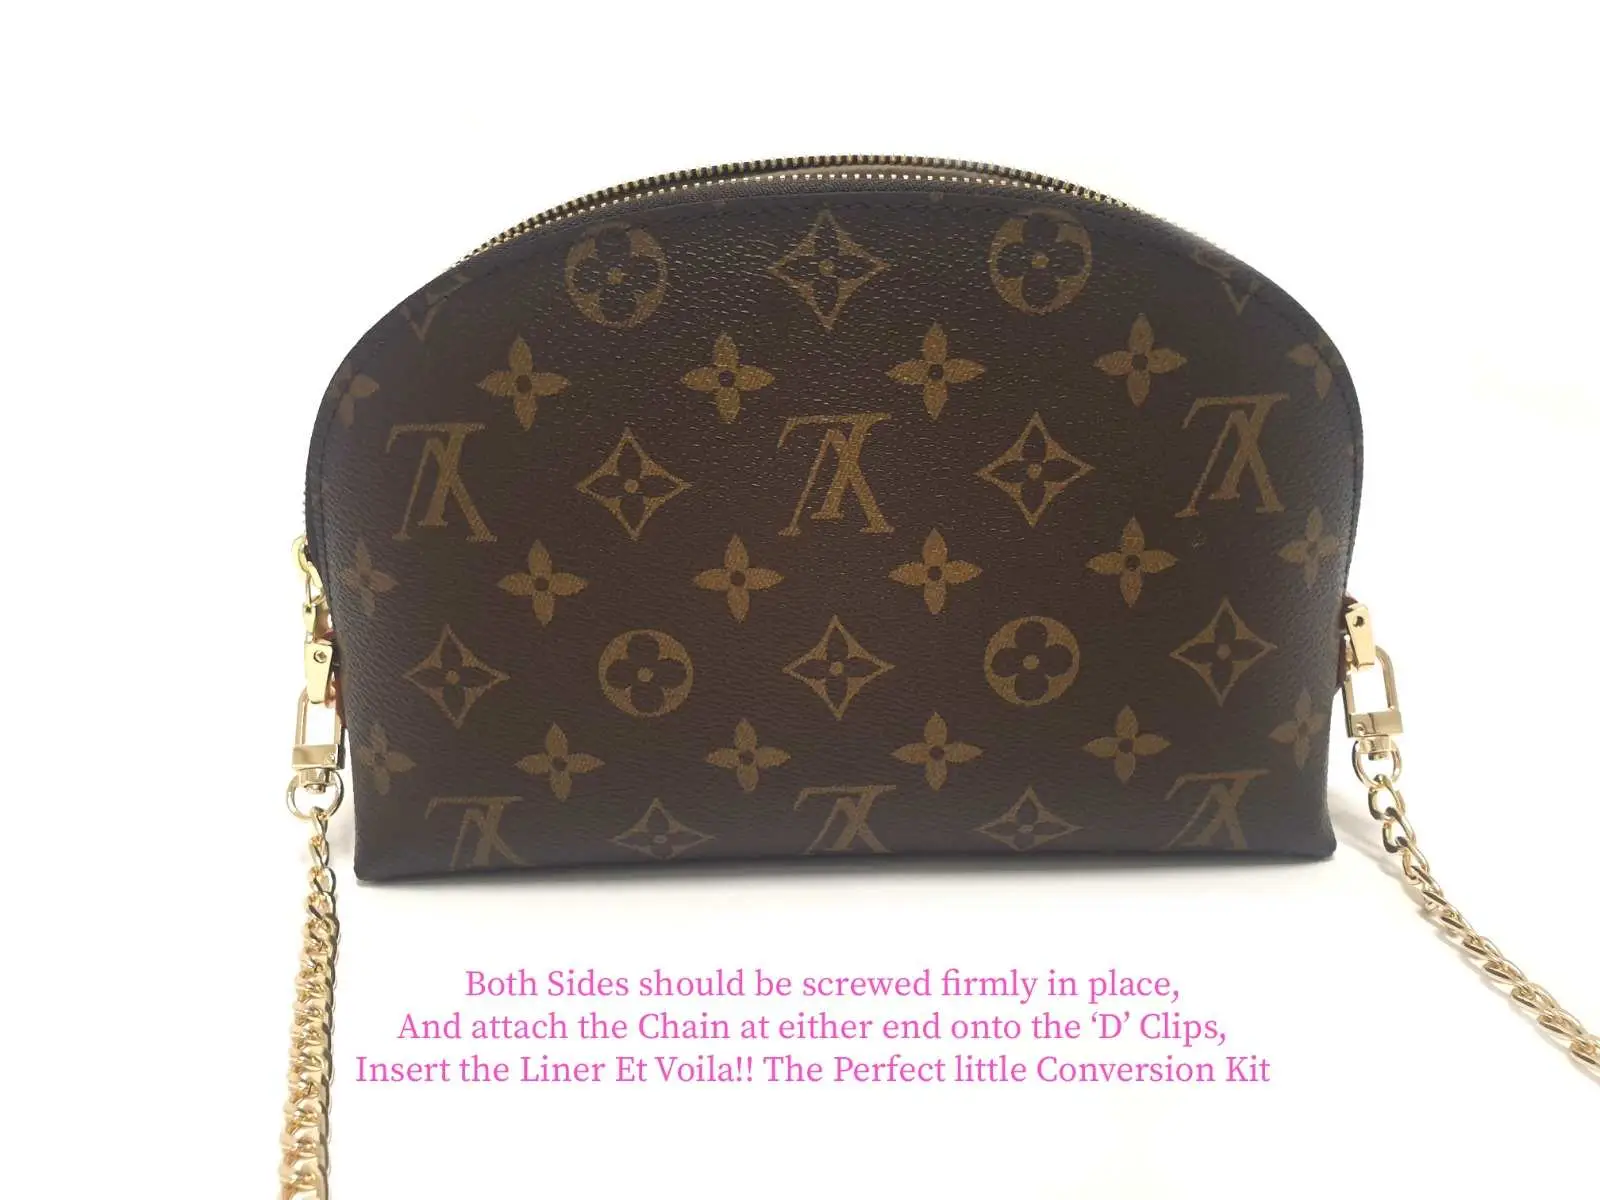 lv toiletry bag insert with chain